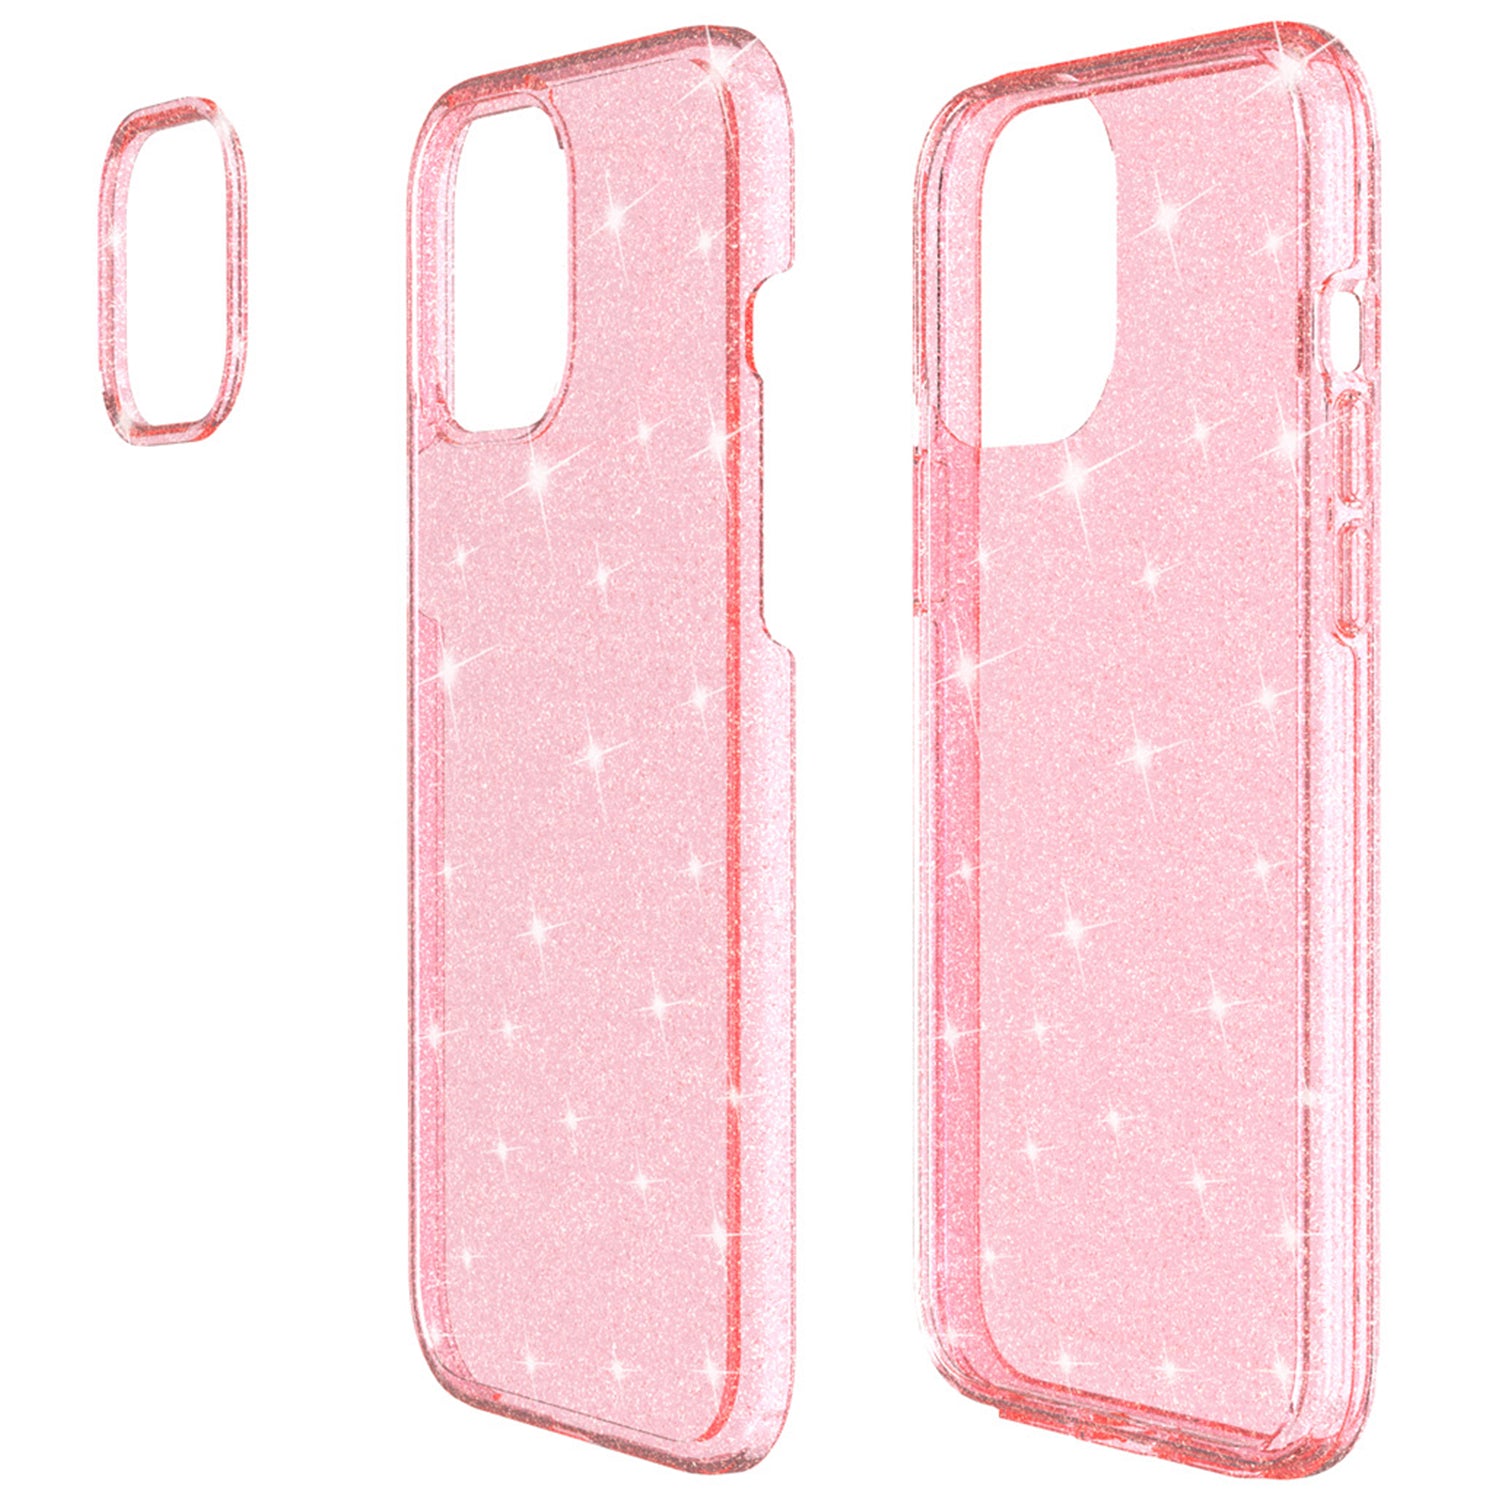 Shiny Transparency Phone Case for iPhone 12 Pro/12 (6.1") - Clear